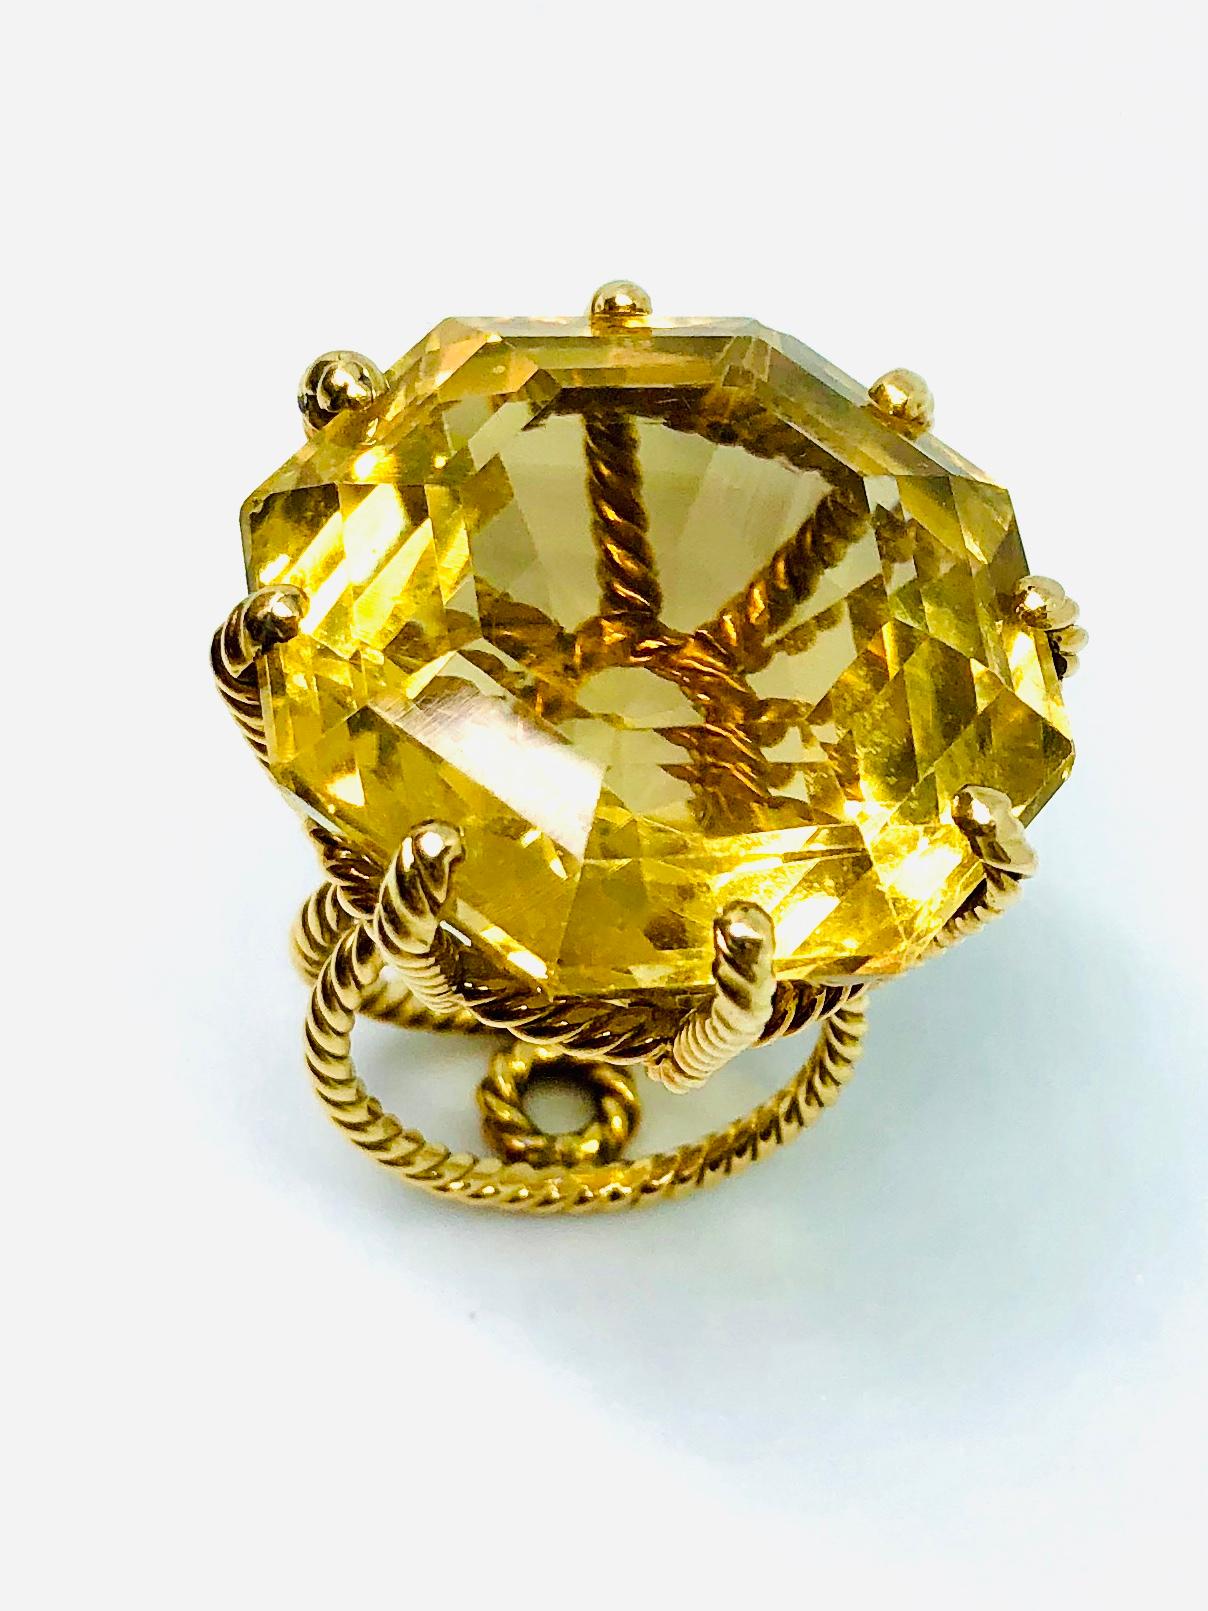 Very large citrine (approximately 50 carats) held in a 18ct yellow gold with a stylish rope twist design. The citrine has a small chip but this doesn’t detract from the overall look. Circa 1965. Ring Size S or US 9.5.

This bold ring may be worn